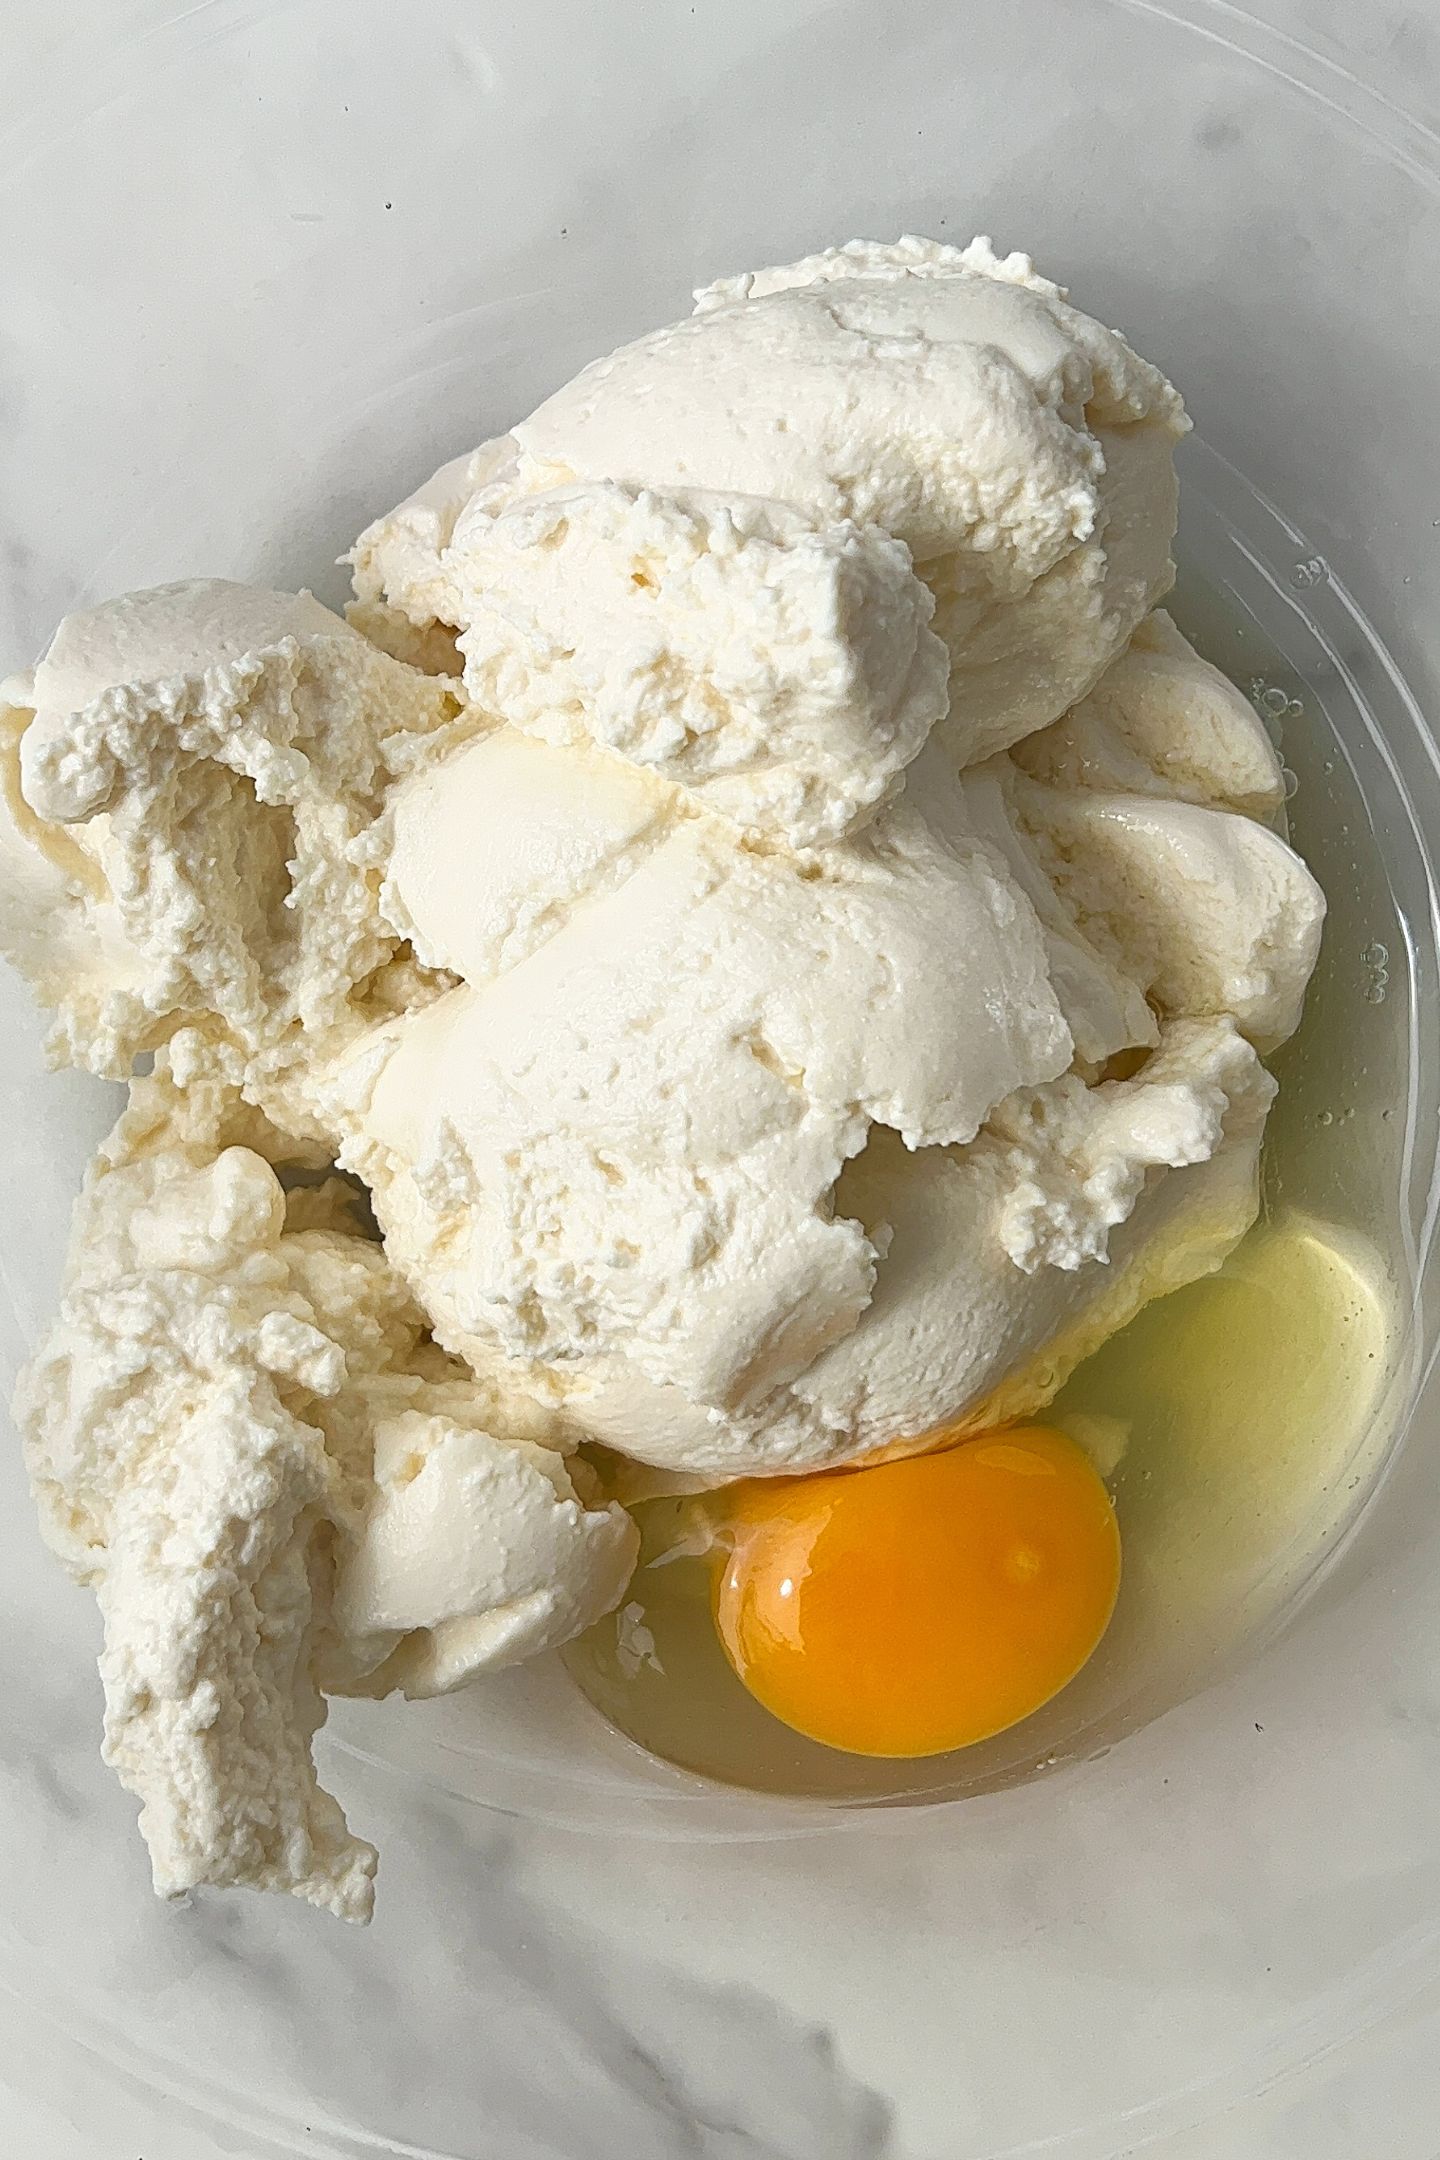 Add the ricotta cheese and eggs to a large mixing bowl